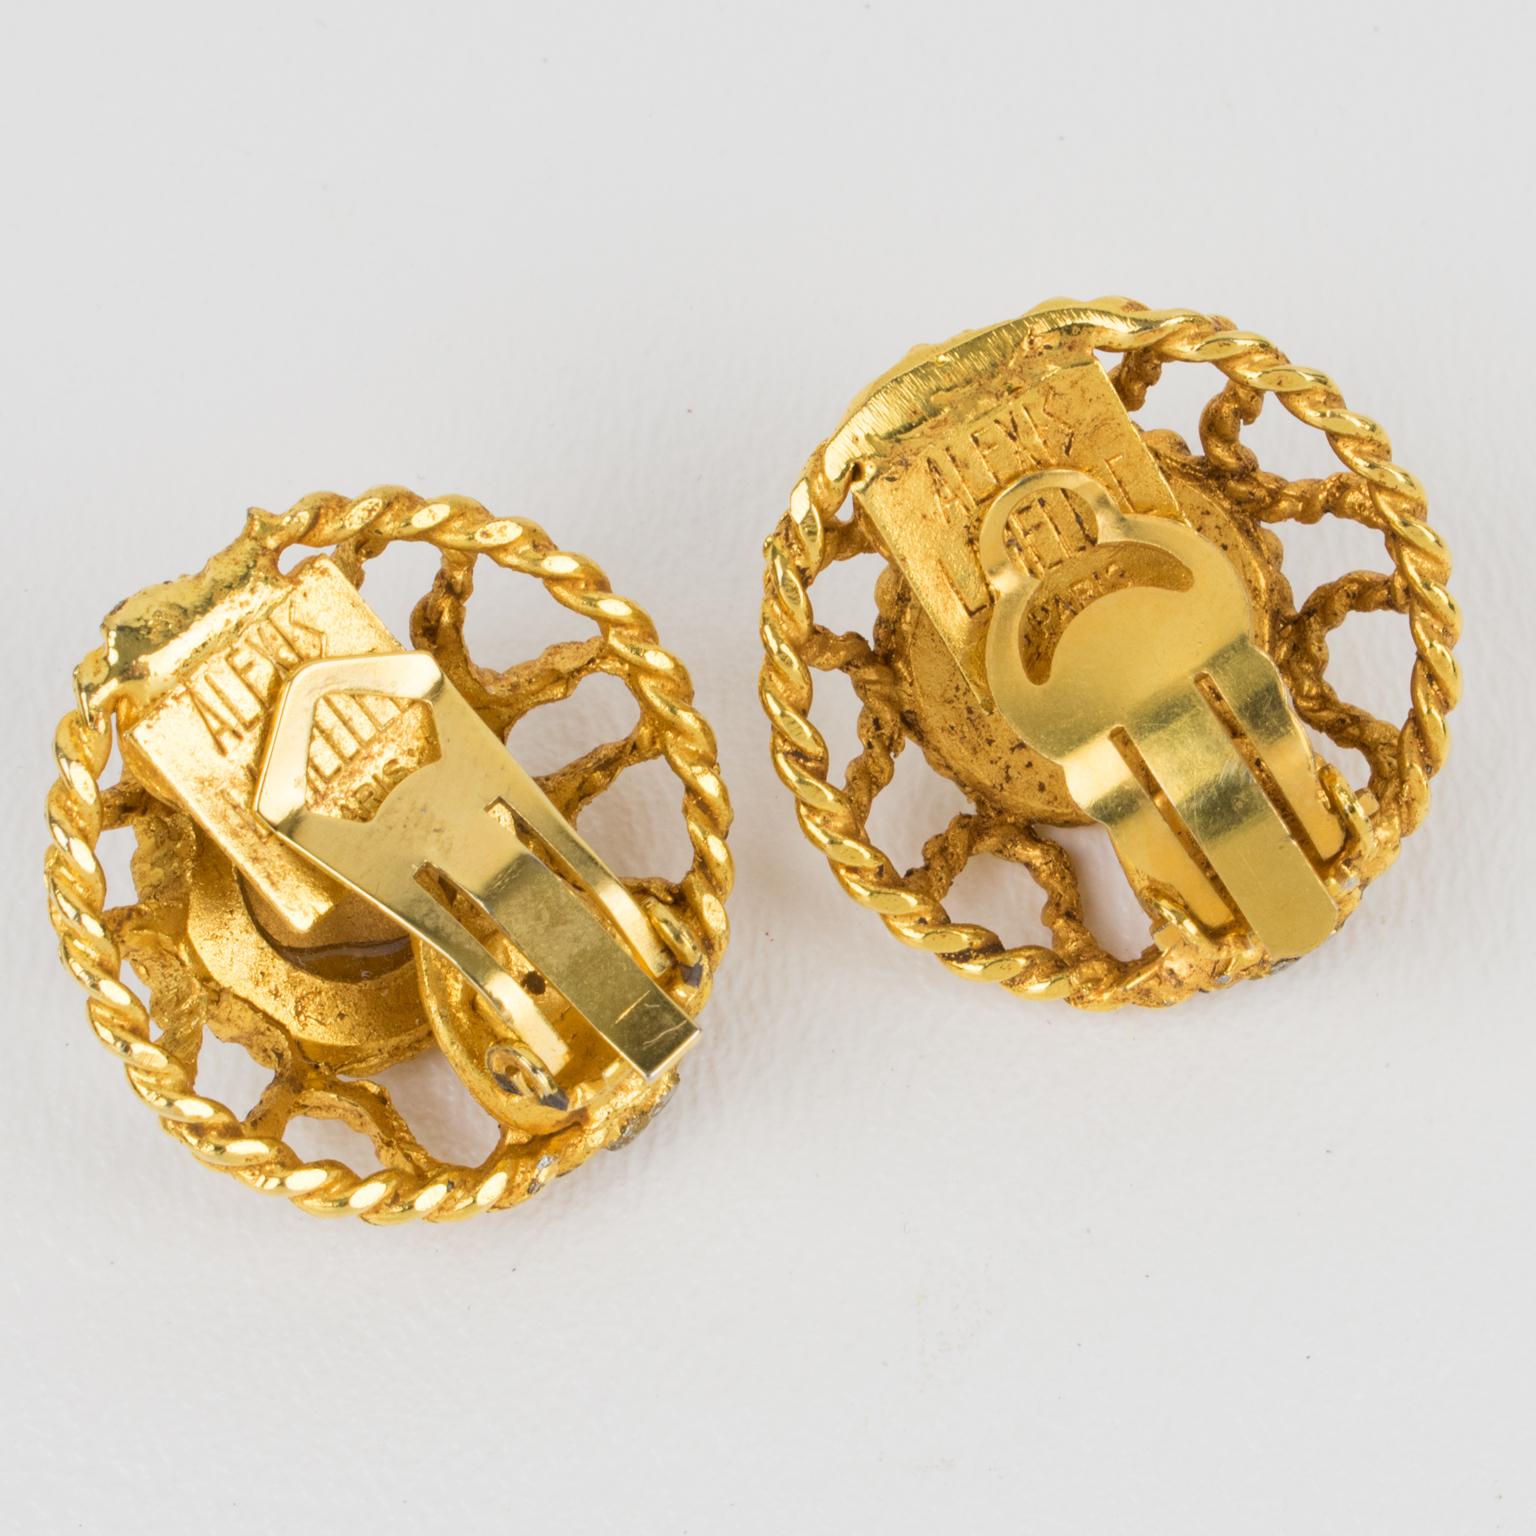  Alexis Lahellec Paris Clip Earrings Gilt Metal with Mirrored Glass Cabochons In Good Condition For Sale In Atlanta, GA